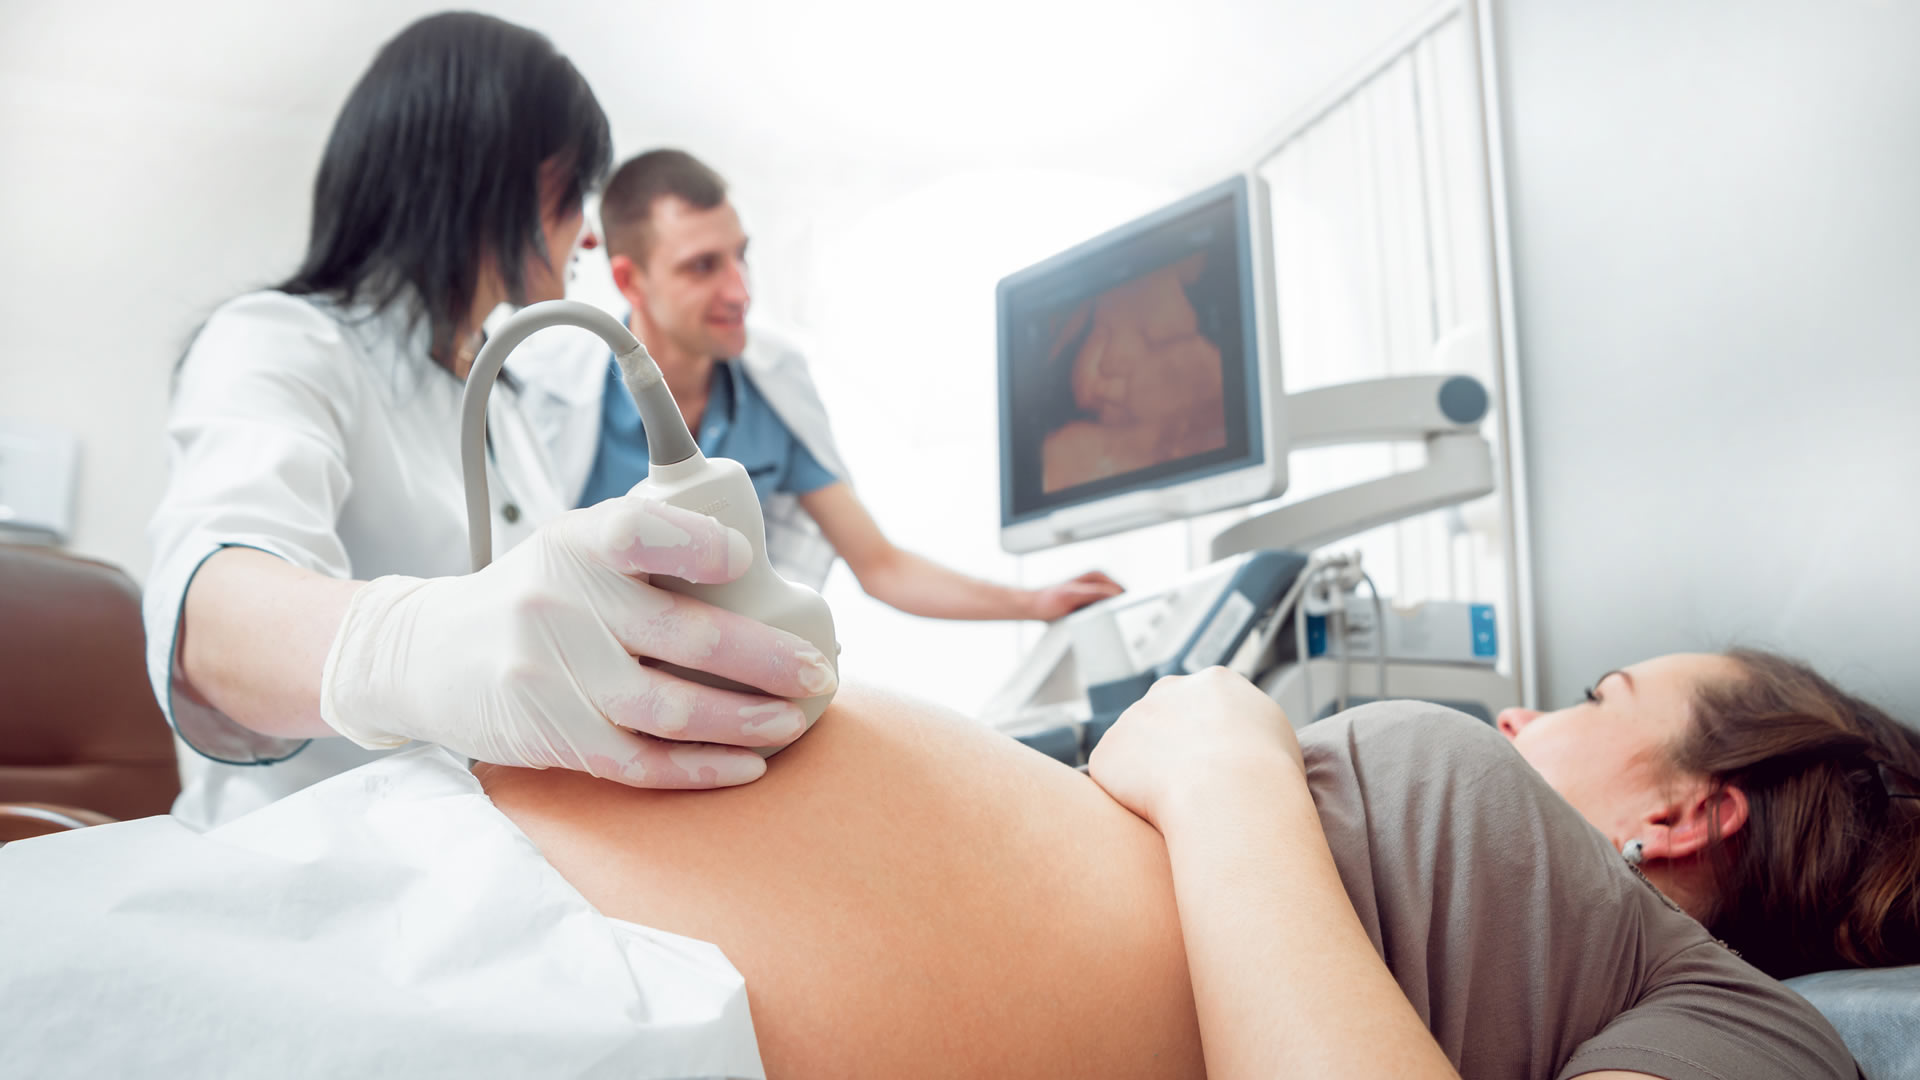 A student practices giving an ultrasound to a pregnant patient